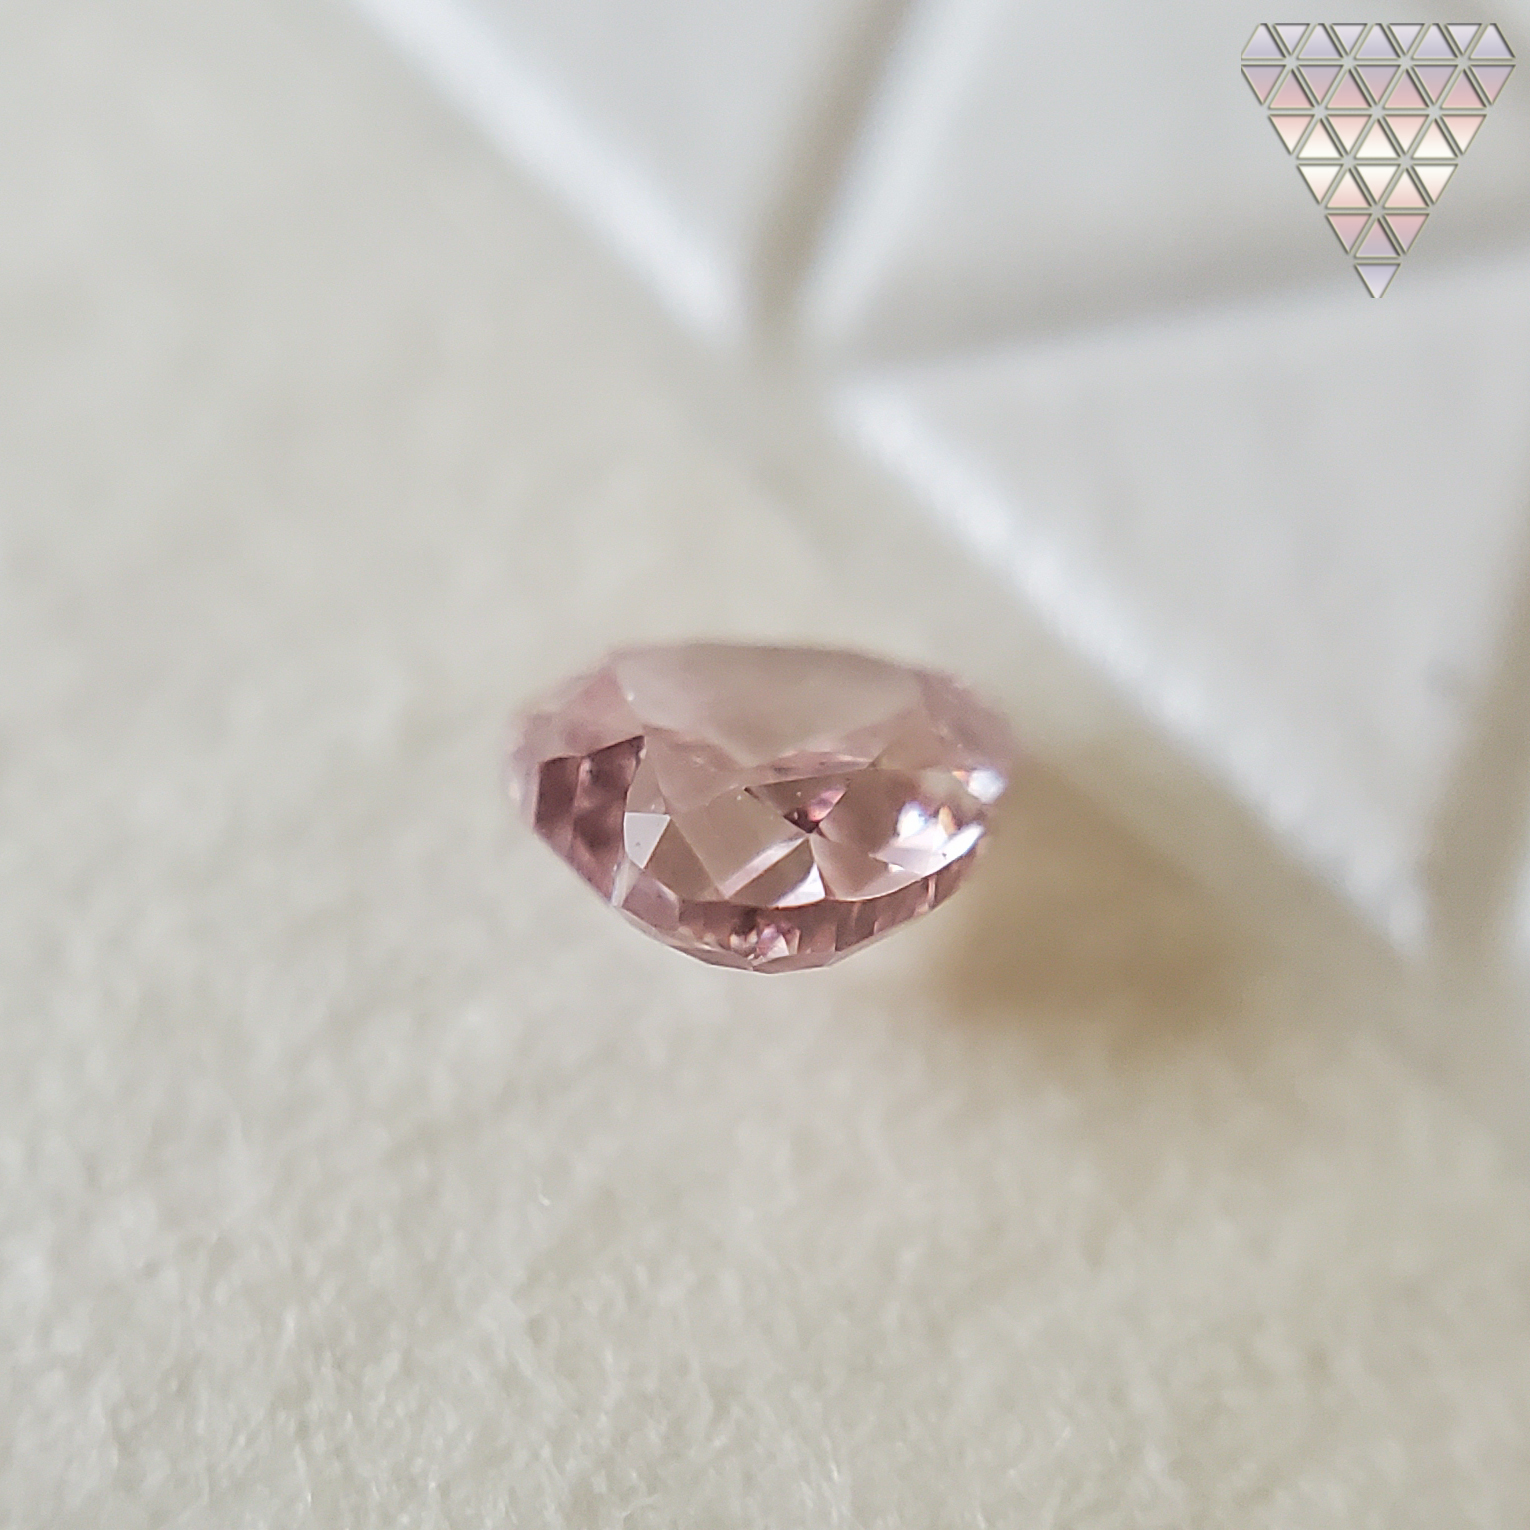 0.093 Ct Fancy Pink Si1 Heart AGT Japan Natural Loose Diamond Exchange Federation 5